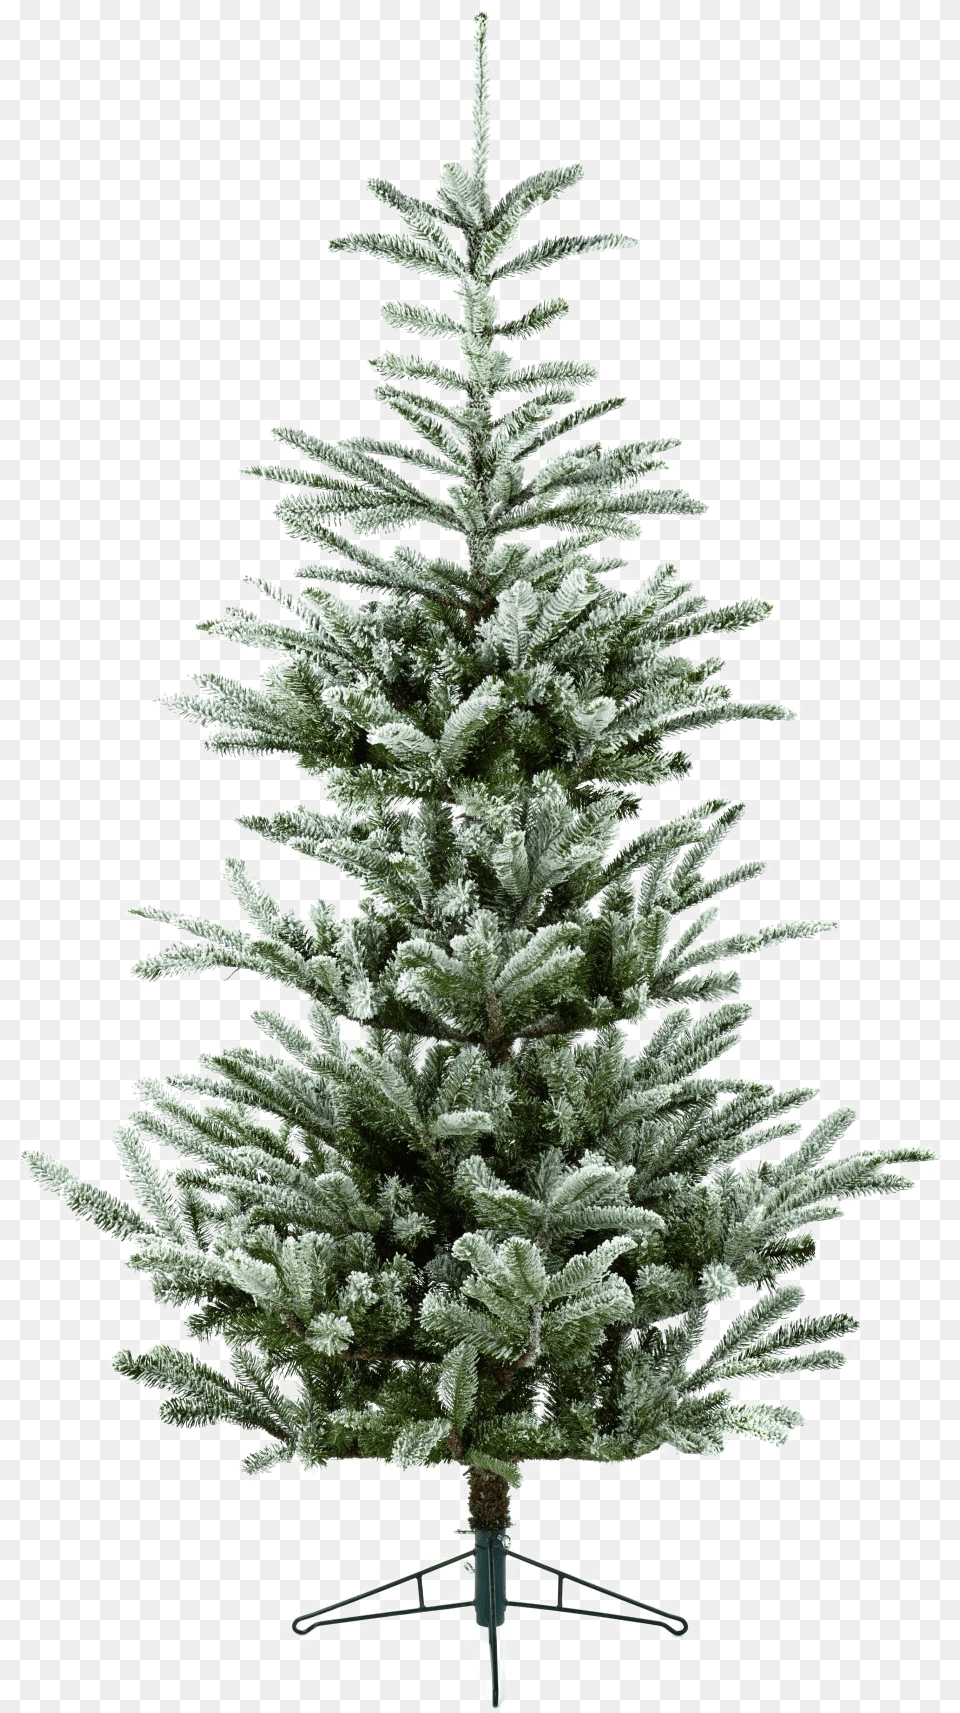 Fir Tree Transparent Image Balsam Fir Christmas Tree, Pine, Plant, Christmas Decorations, Festival Free Png Download